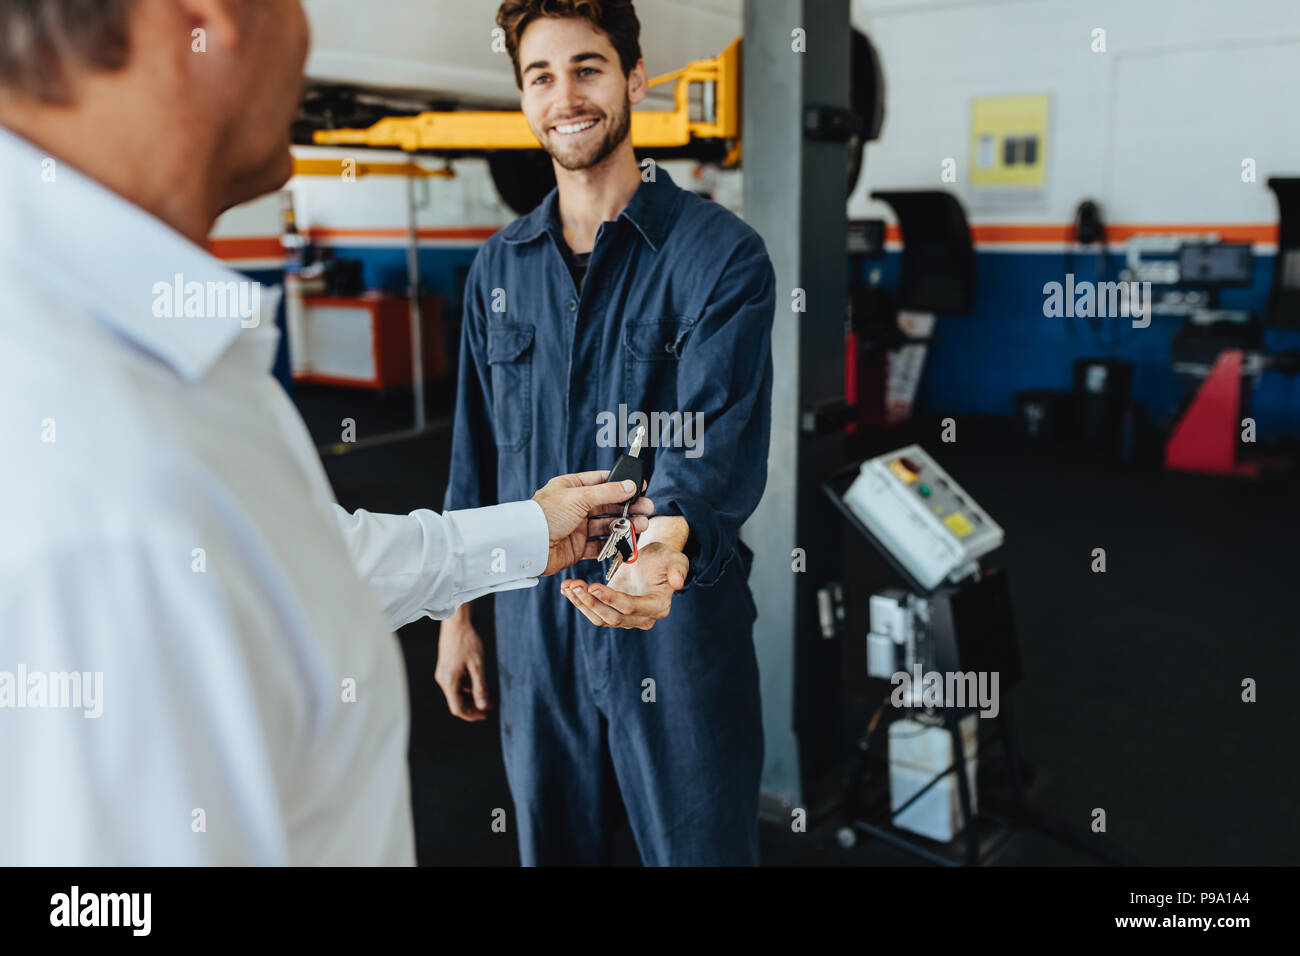 Mechanic receiving car keys from customer in automobile service center. Customer giving his car keys to mechanic at the repair garage. Stock Photo